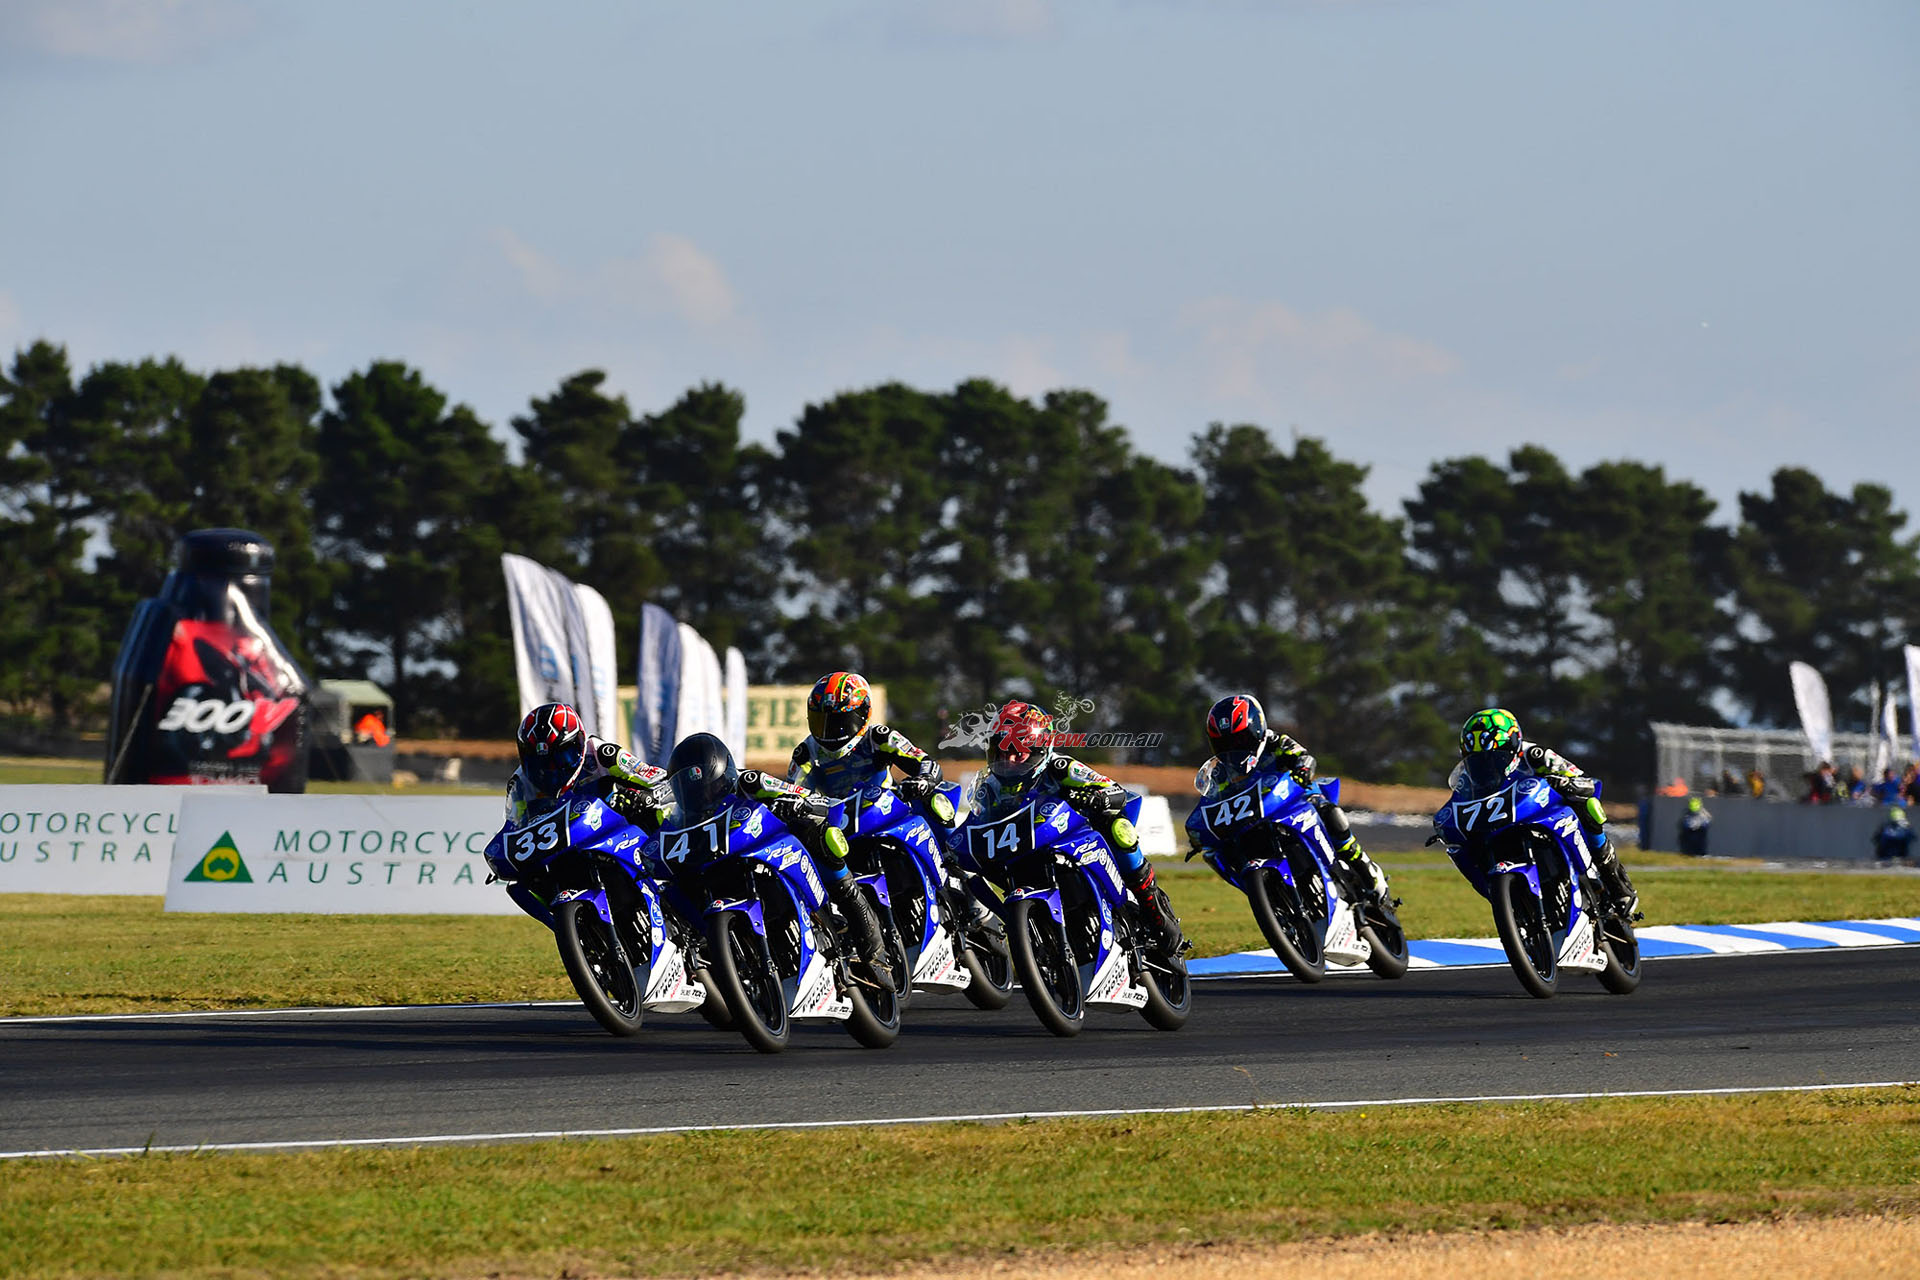 ASBK head to Wakefield Park this weekend! Make sure you drop by to check out all the exciting racing.